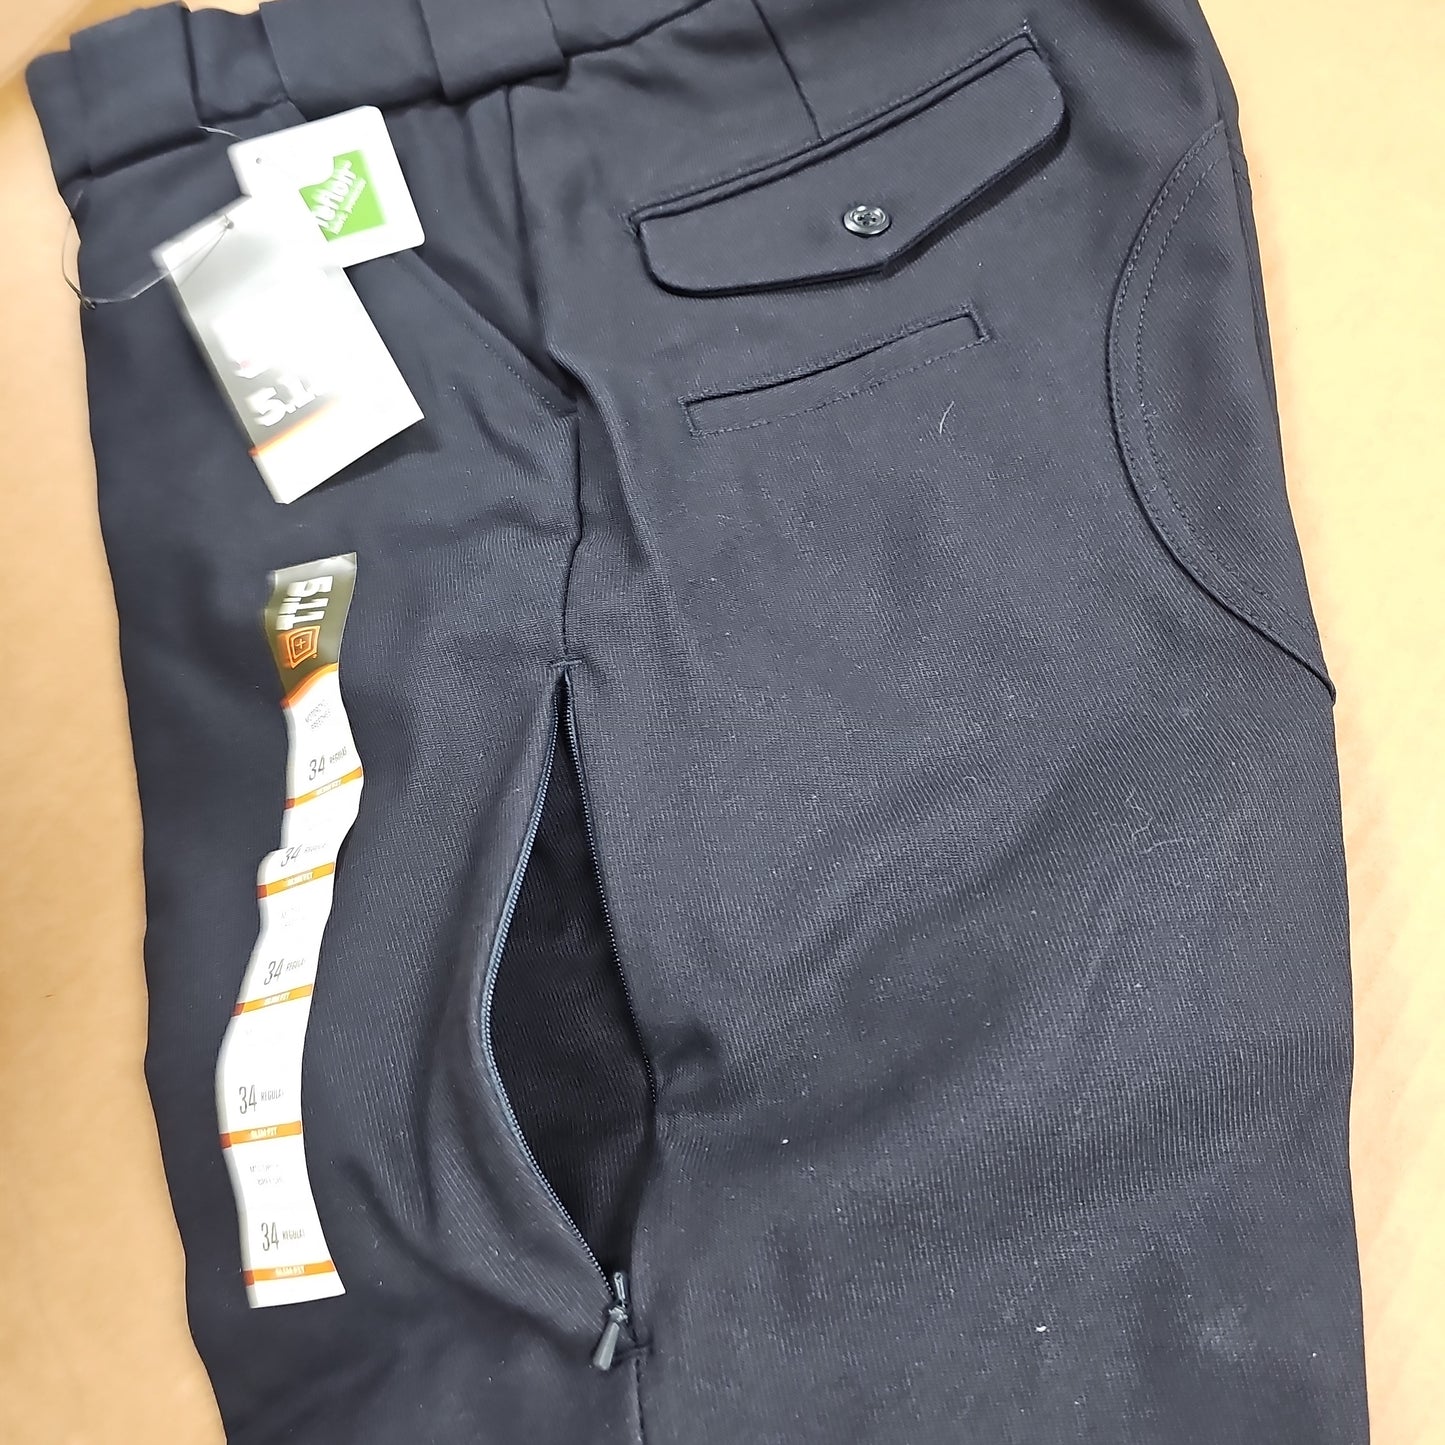 5.11 Tactical Pant Motor Cycle Breeches Midnight Navy 34/R 74407-750-34-R